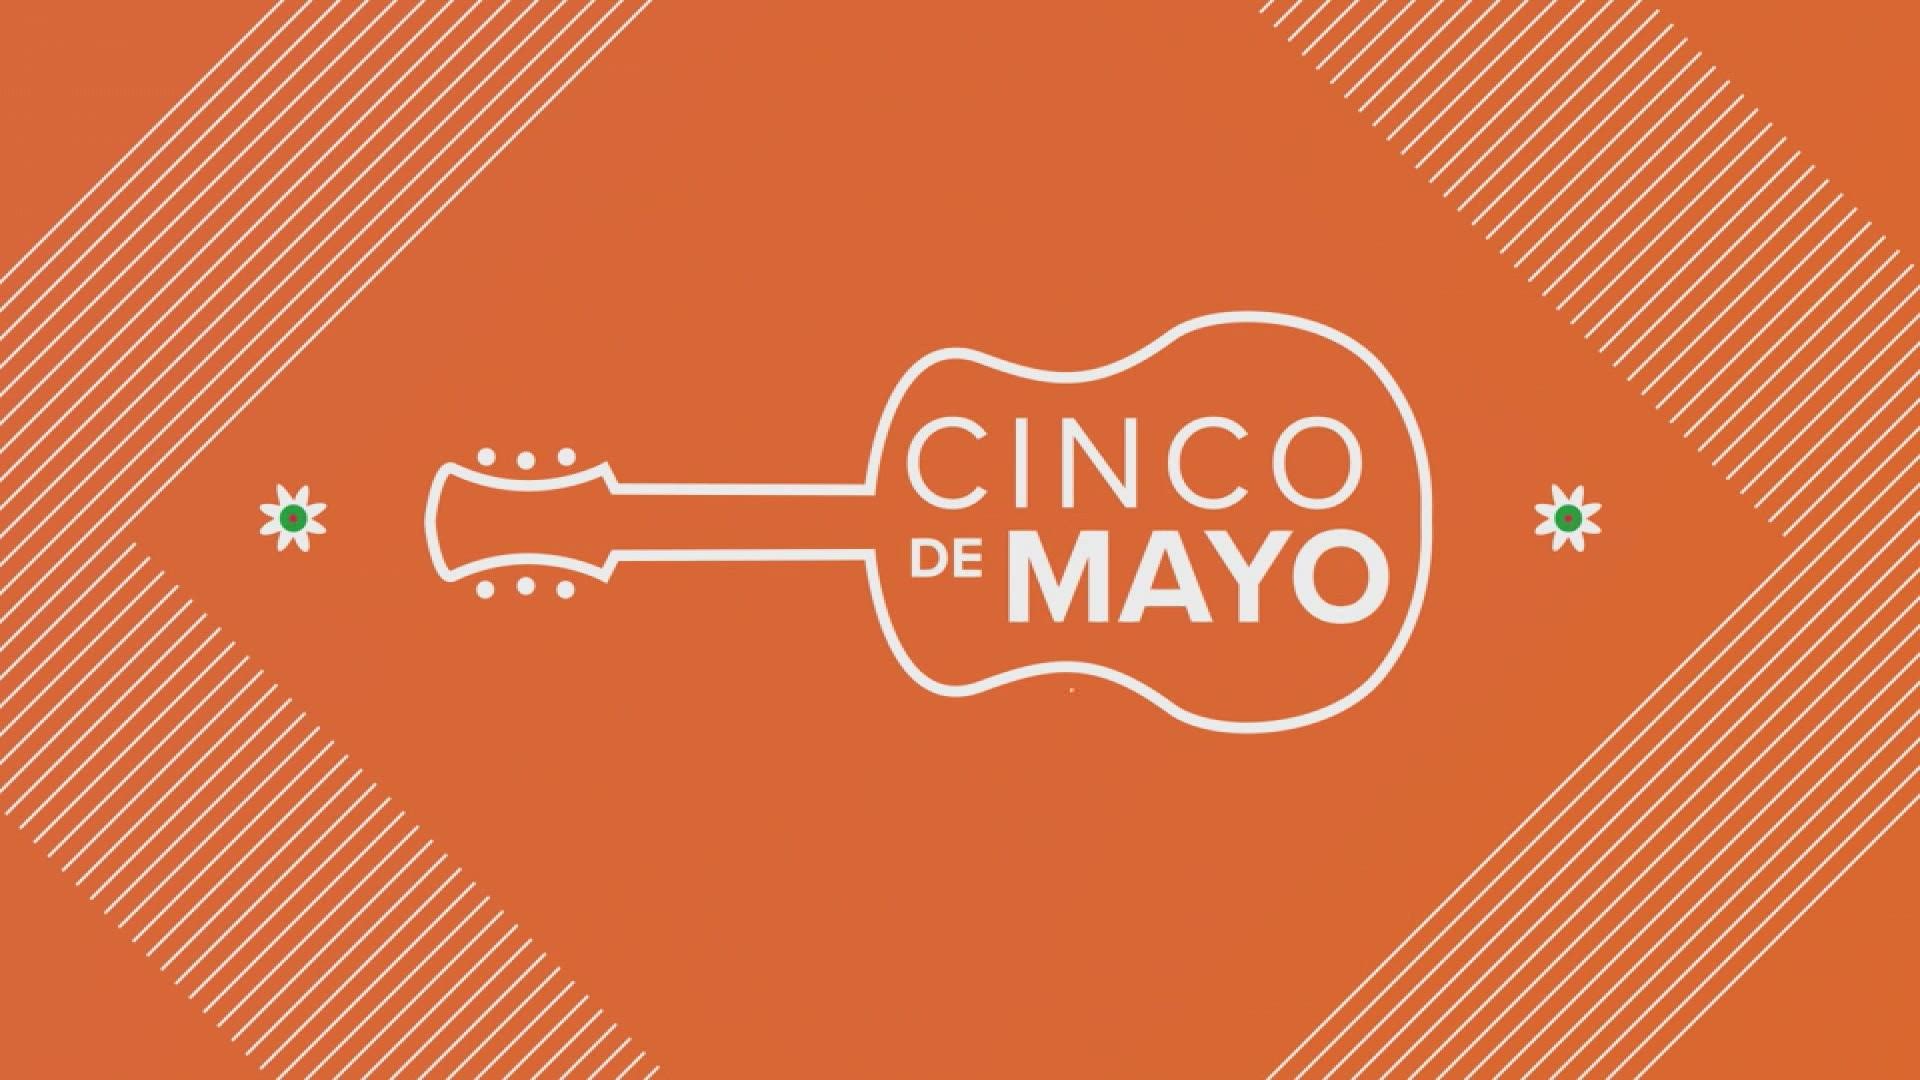 Cinco de Mayo is a holiday celebrating Mexico's victory over France in 1862 in the Battle of Puebla.